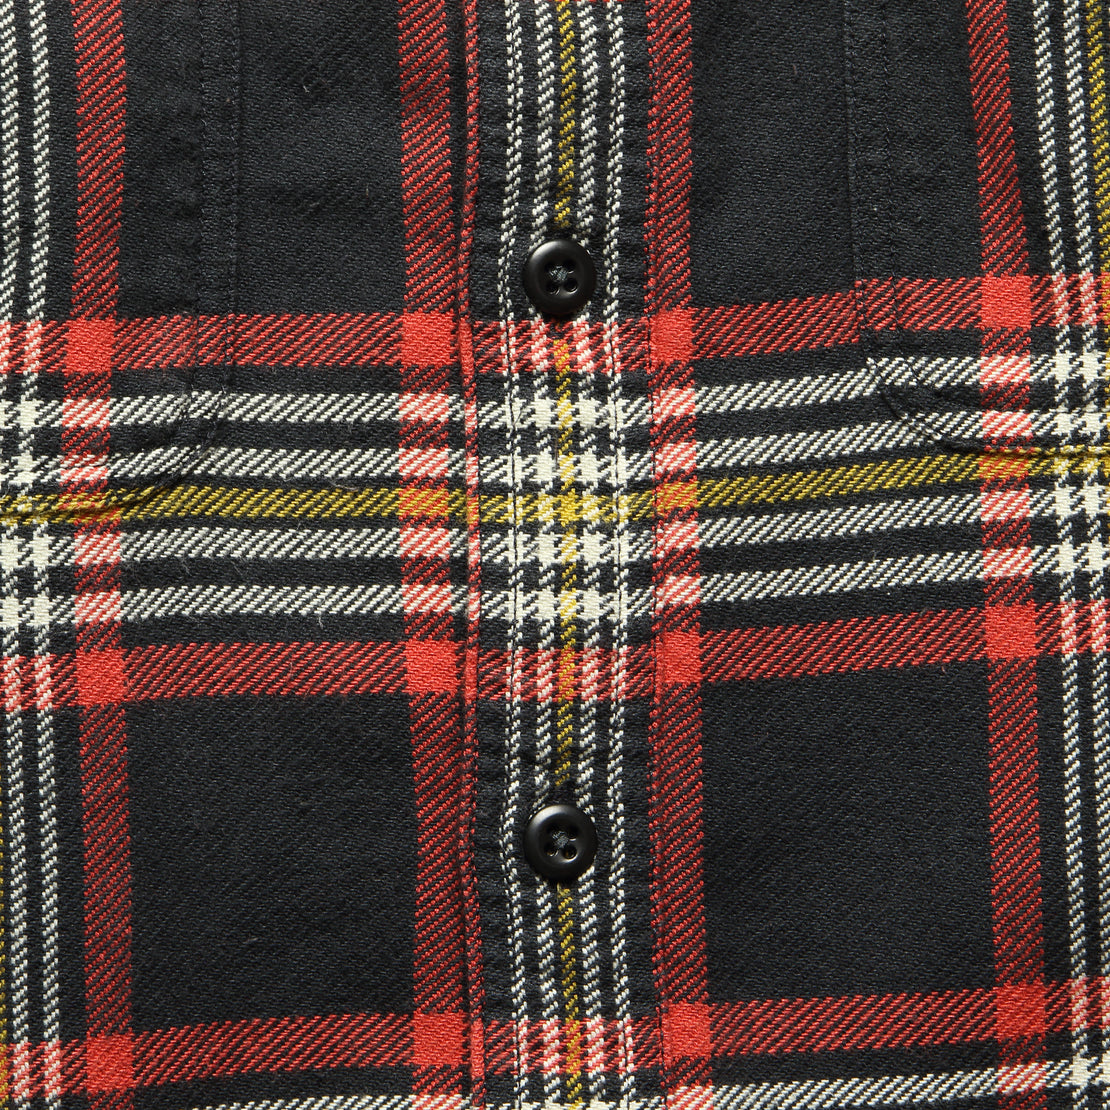 Vintage 100% Cotton Red Plaid Small Long Sleeve Shirt — Ralph